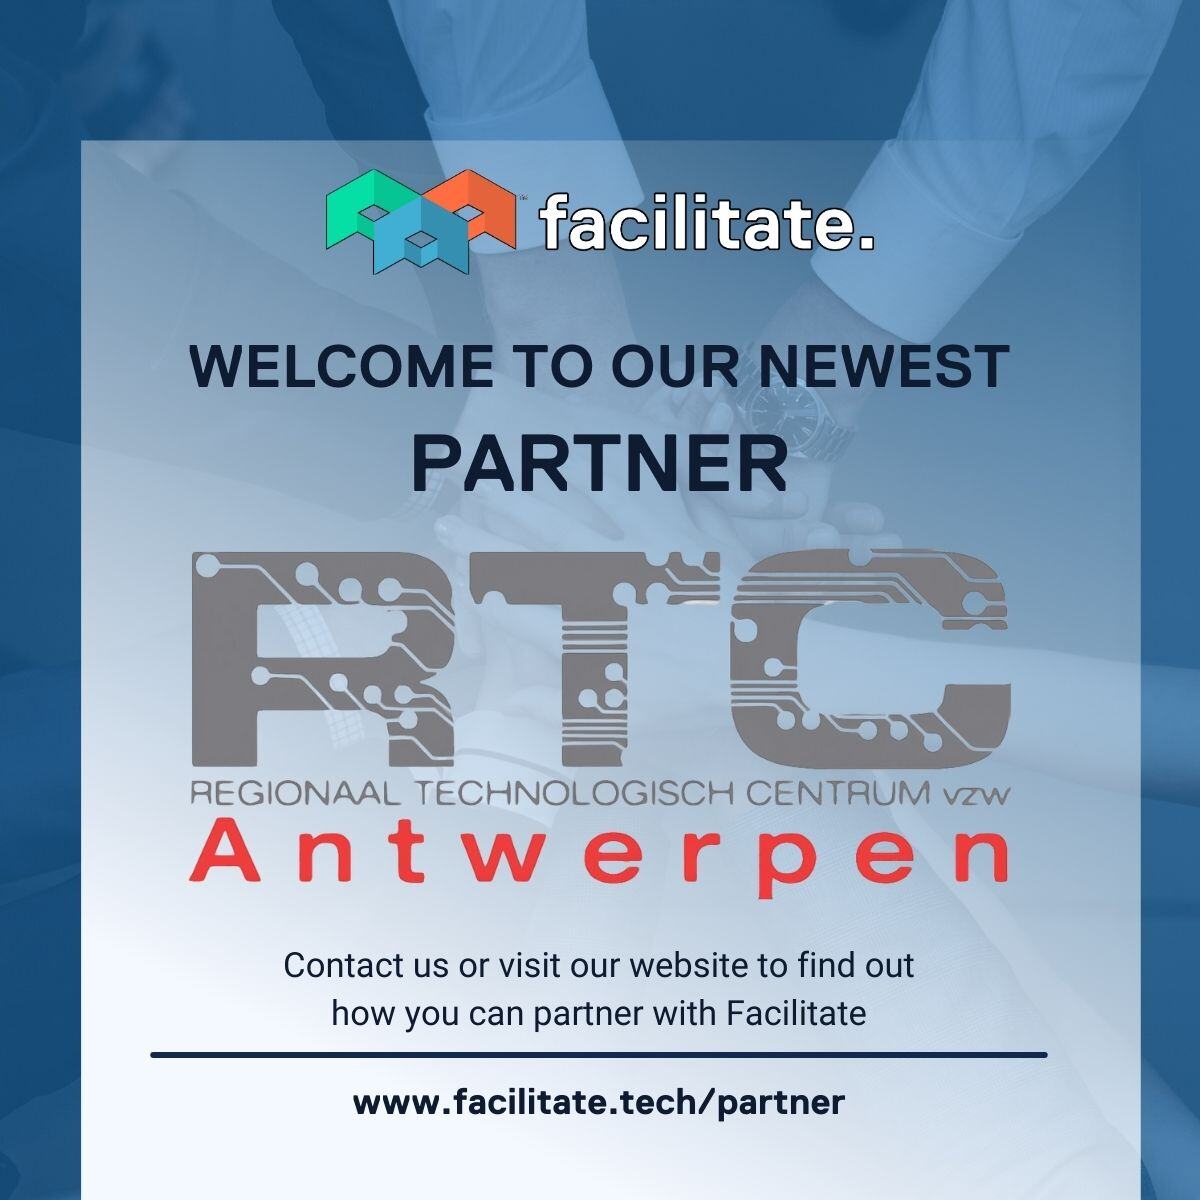 Facilitate partners with RTC Antwerpen